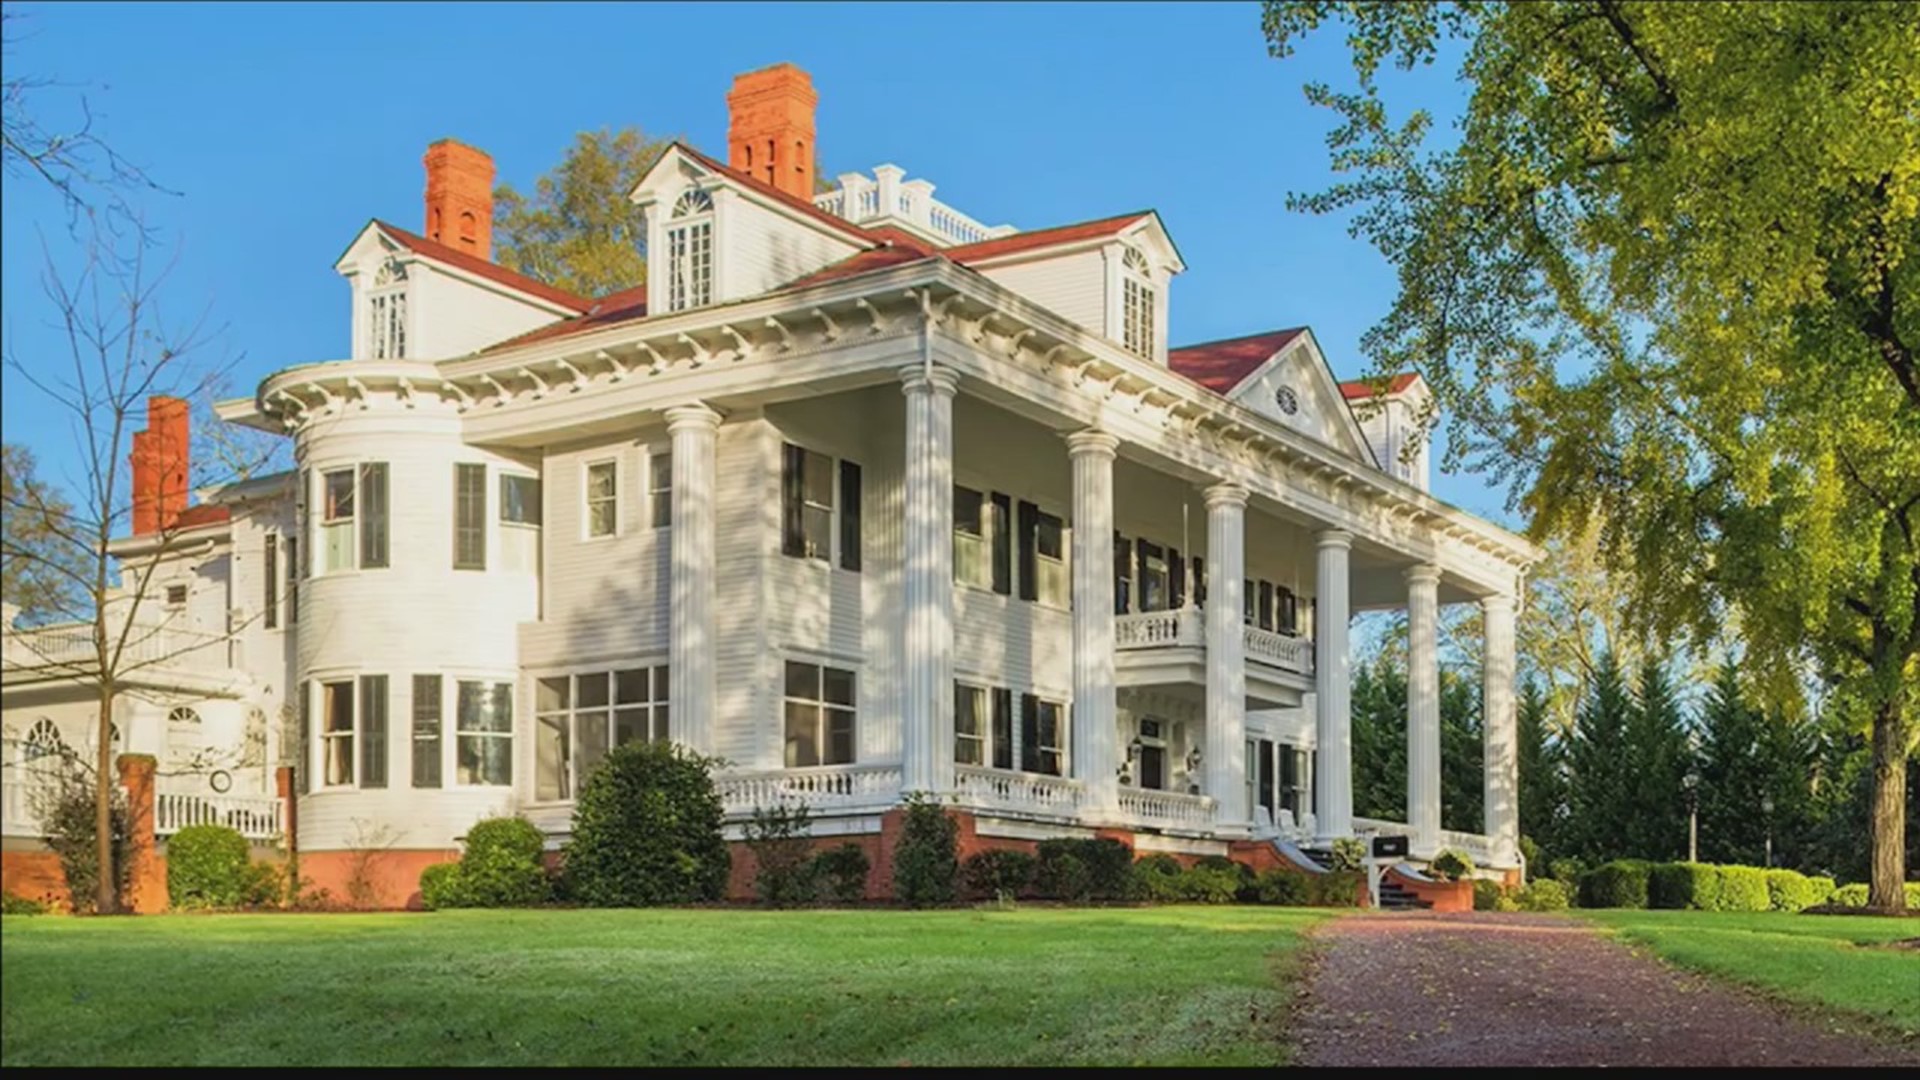 The Antebellum mansion inspiring Ashley Wilke's estate from "Gone with the Wind" is up for sale.